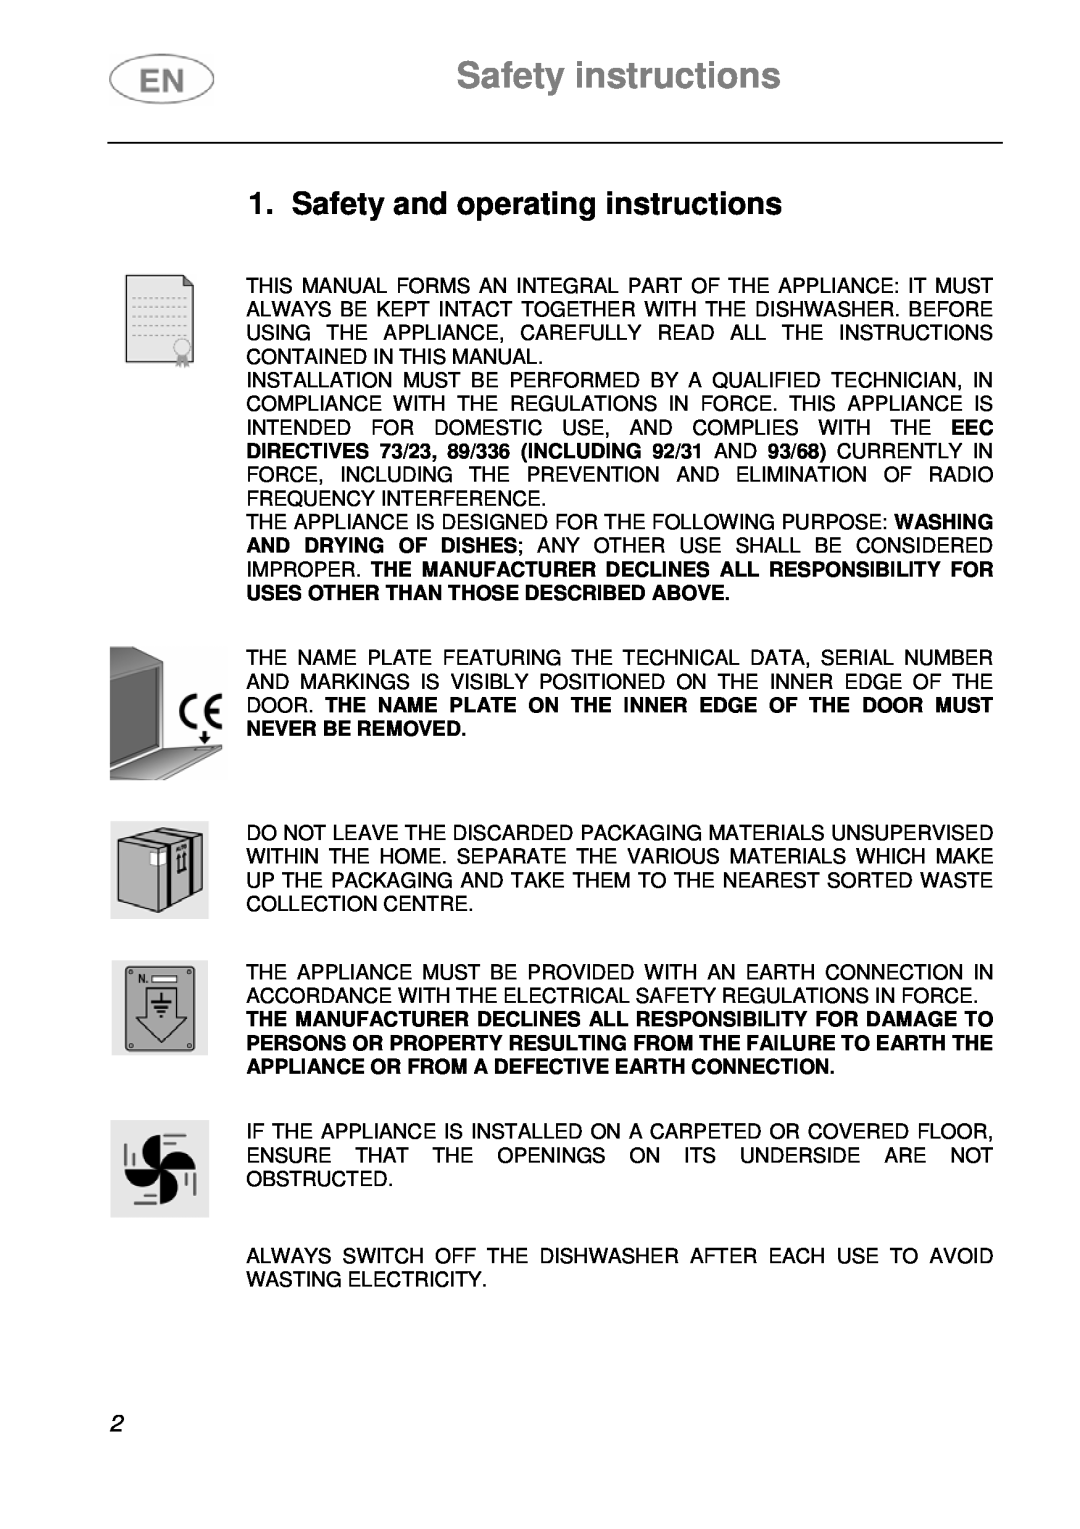 Smeg STA643PQ manual Safety instructions, Safety and operating instructions, Uses Other Than Those Described Above 